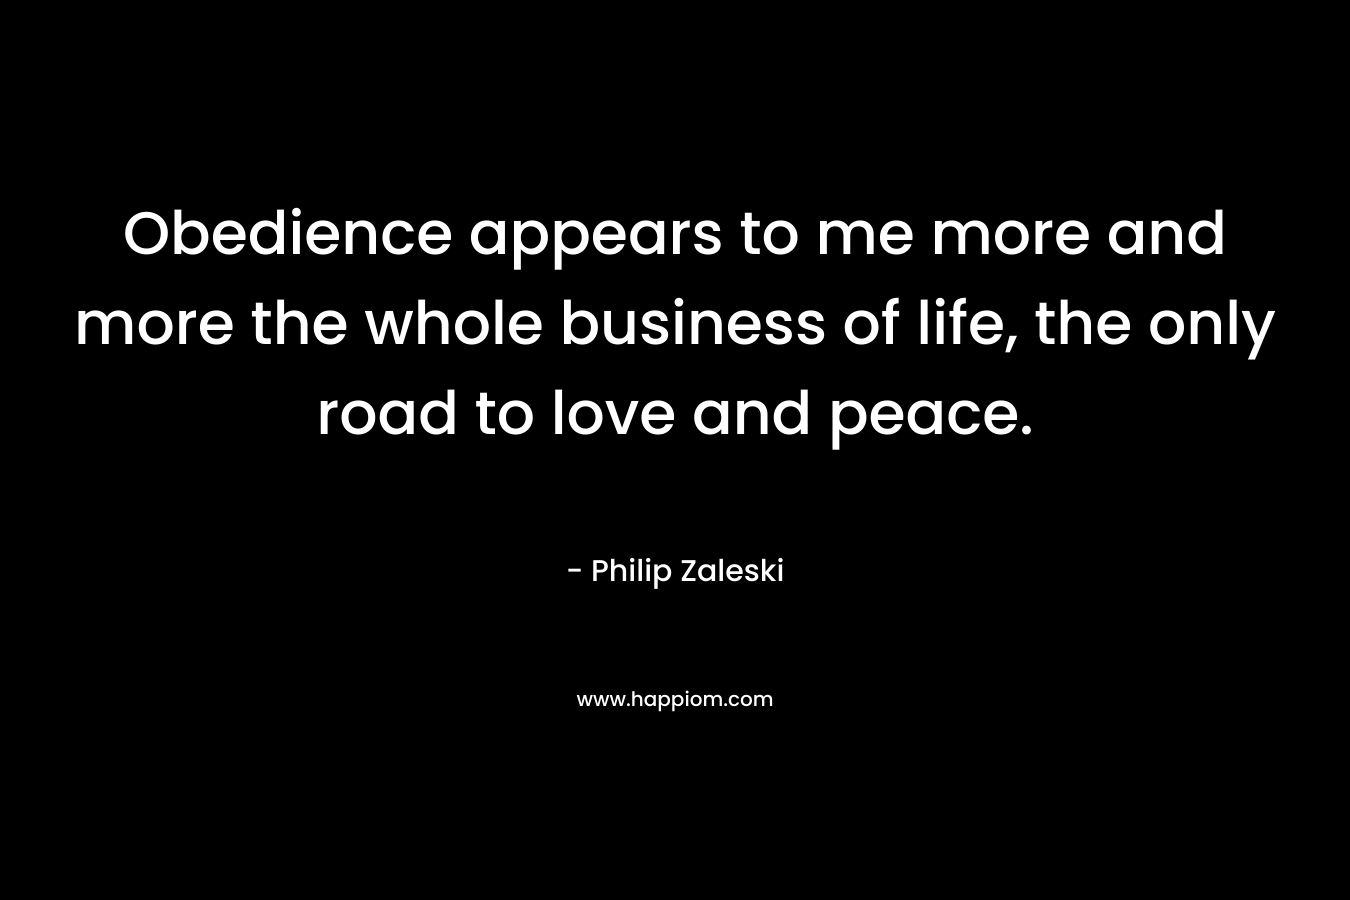 Obedience appears to me more and more the whole business of life, the only road to love and peace. – Philip Zaleski